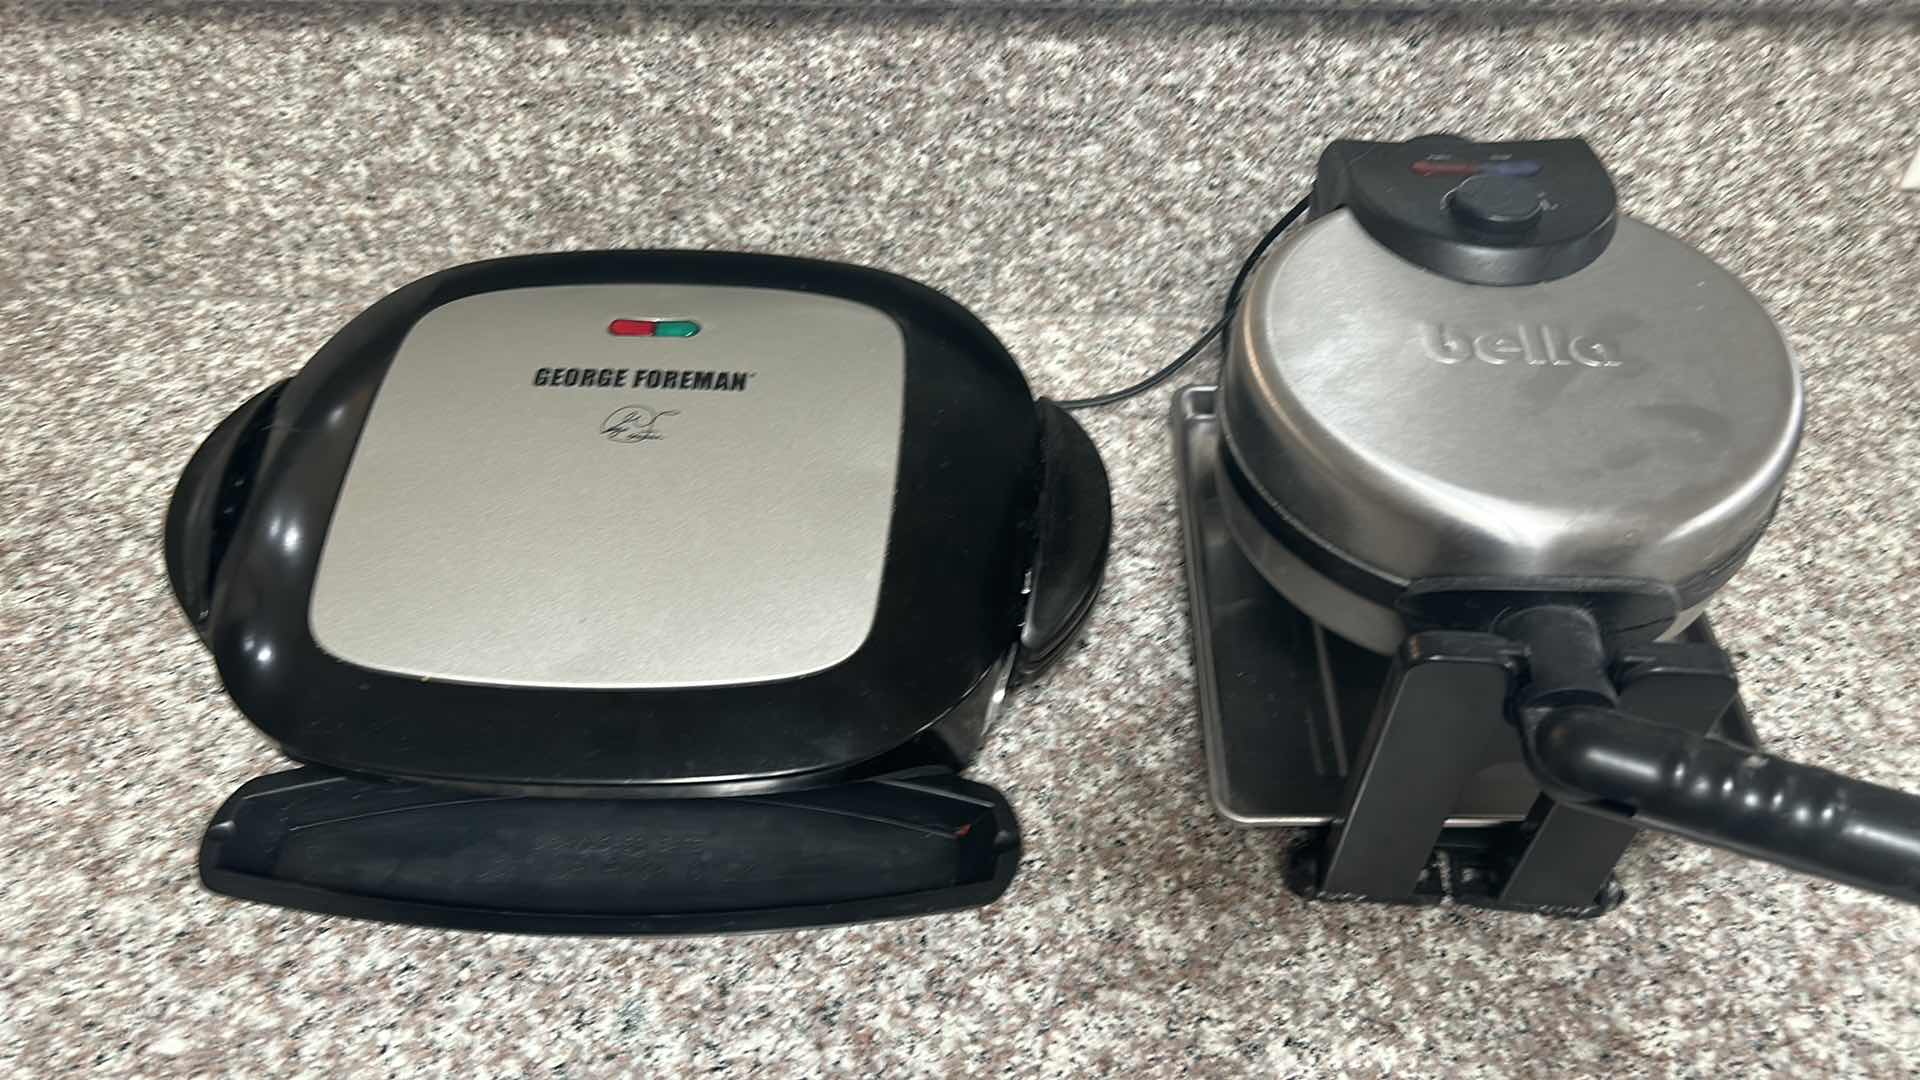 Photo 6 of GEORGE FOREMAN GRILL AND BELLA WAFFLE MAKER